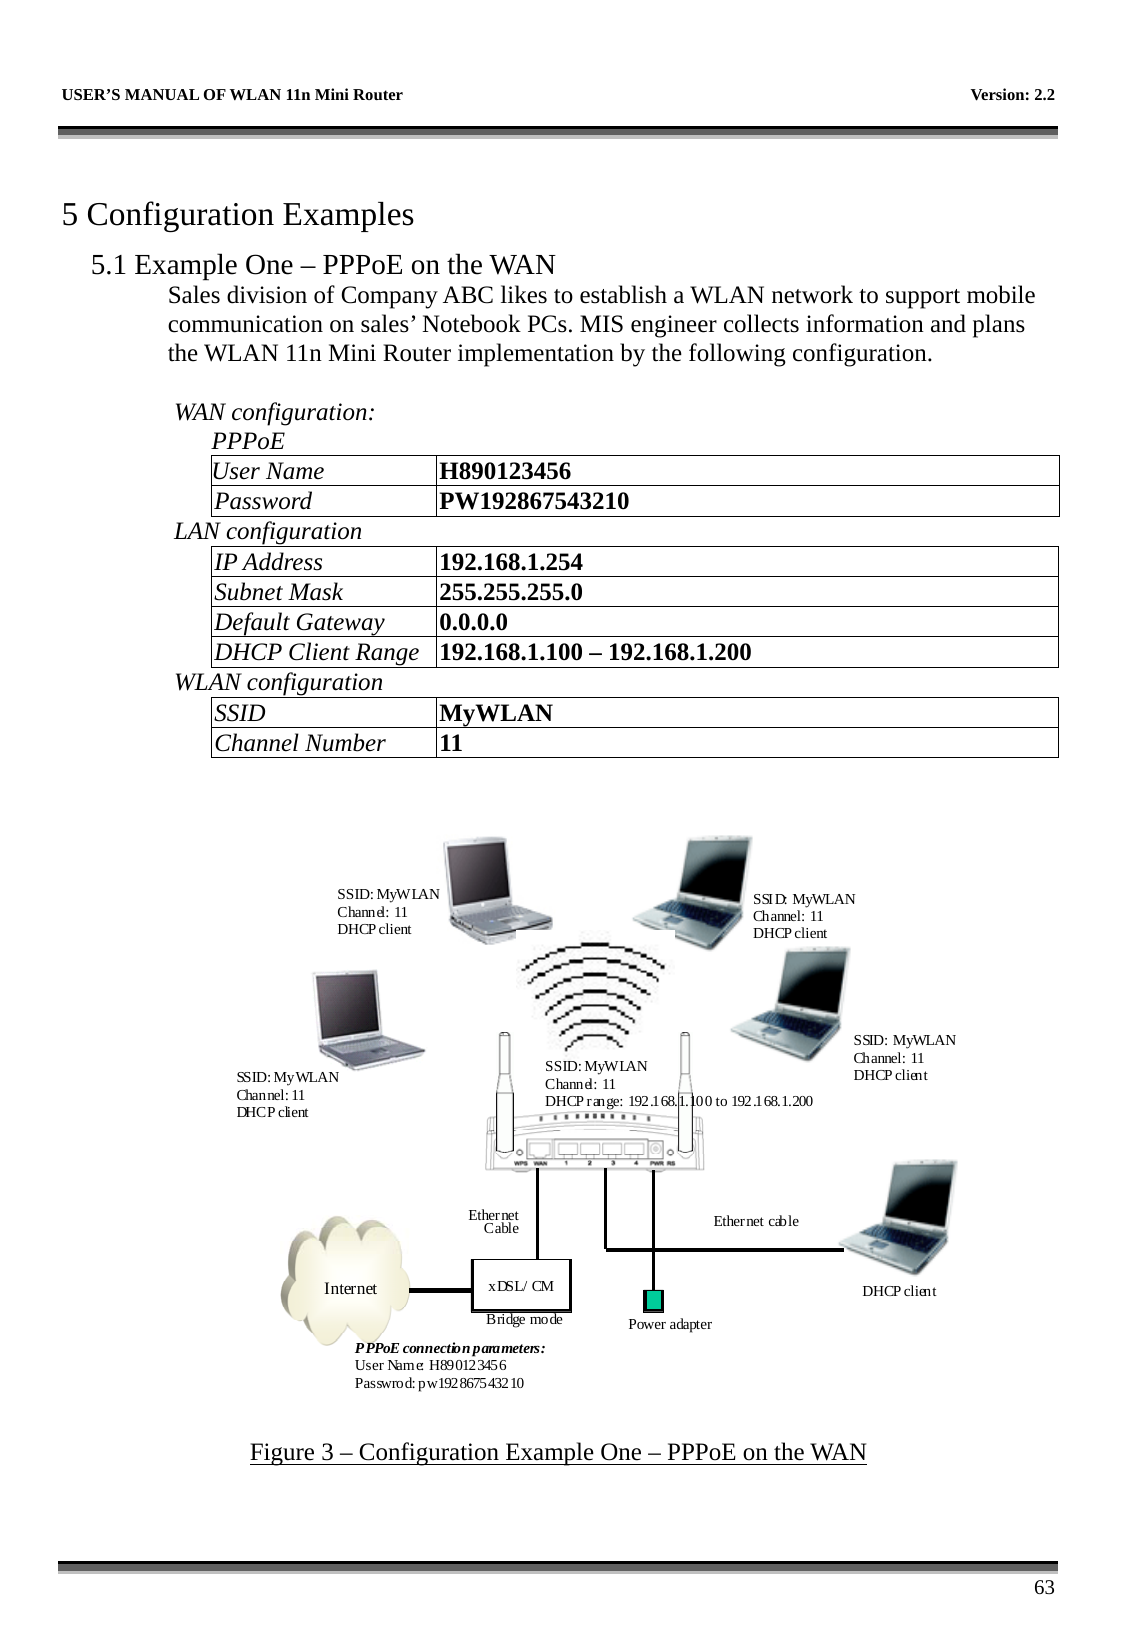   USER’S MANUAL OF WLAN 11n Mini Router    Version: 2.2      63  5 Configuration Examples 5.1 Example One – PPPoE on the WAN Sales division of Company ABC likes to establish a WLAN network to support mobile communication on sales’ Notebook PCs. MIS engineer collects information and plans the WLAN 11n Mini Router implementation by the following configuration.  WAN configuration:   PPPoE User Name  H890123456 Password  PW192867543210 LAN configuration IP Address  192.168.1.254 Subnet Mask  255.255.255.0 Default Gateway  0.0.0.0 DHCP Client Range  192.168.1.100 – 192.168.1.200 WLAN configuration SSID  MyWLAN Channel Number  11 Internet xDSL/ CMPower adapterEthernetCable Ethernet cableSSID: MyWLANChannel: 11 DHCP clientSSID: MyWLANChannel: 11 DHCP clientSSID: MyWLANChannel: 11 DHCP clientSS ID :  M y WLA NChannel: 11  DHC P clientDHCP clientBridge modeP PPoE connectio n p arameters :User Name: H890123456Passwrod: pw192867543210SSID: MyWLANChannel: 11DHCP r an ge: 192.168.1.10 0 to 192.168.1.200 Figure 3 – Configuration Example One – PPPoE on the WAN 